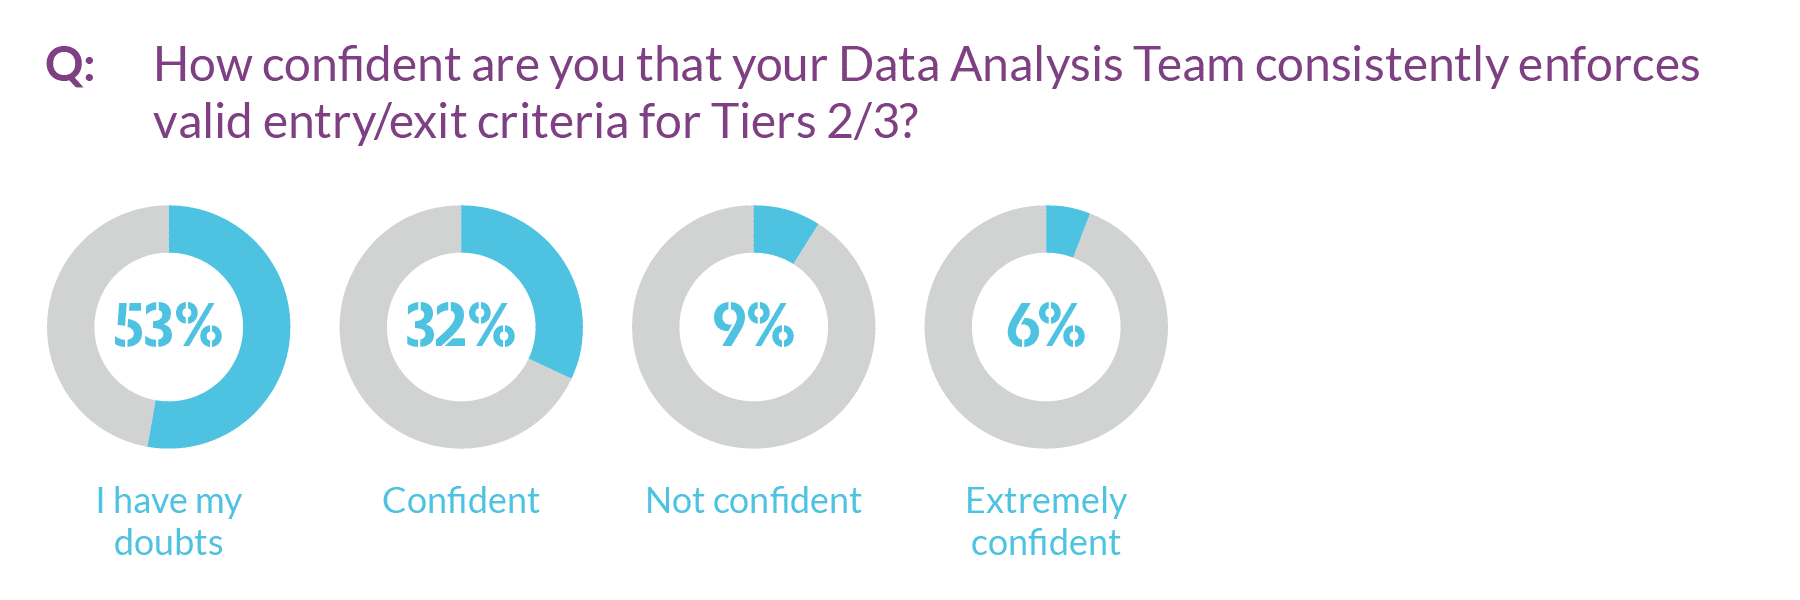 Graph showing districts' confidence that their Data Analysis Teams enforce valid entry/exit criteria for Tiers 2/3